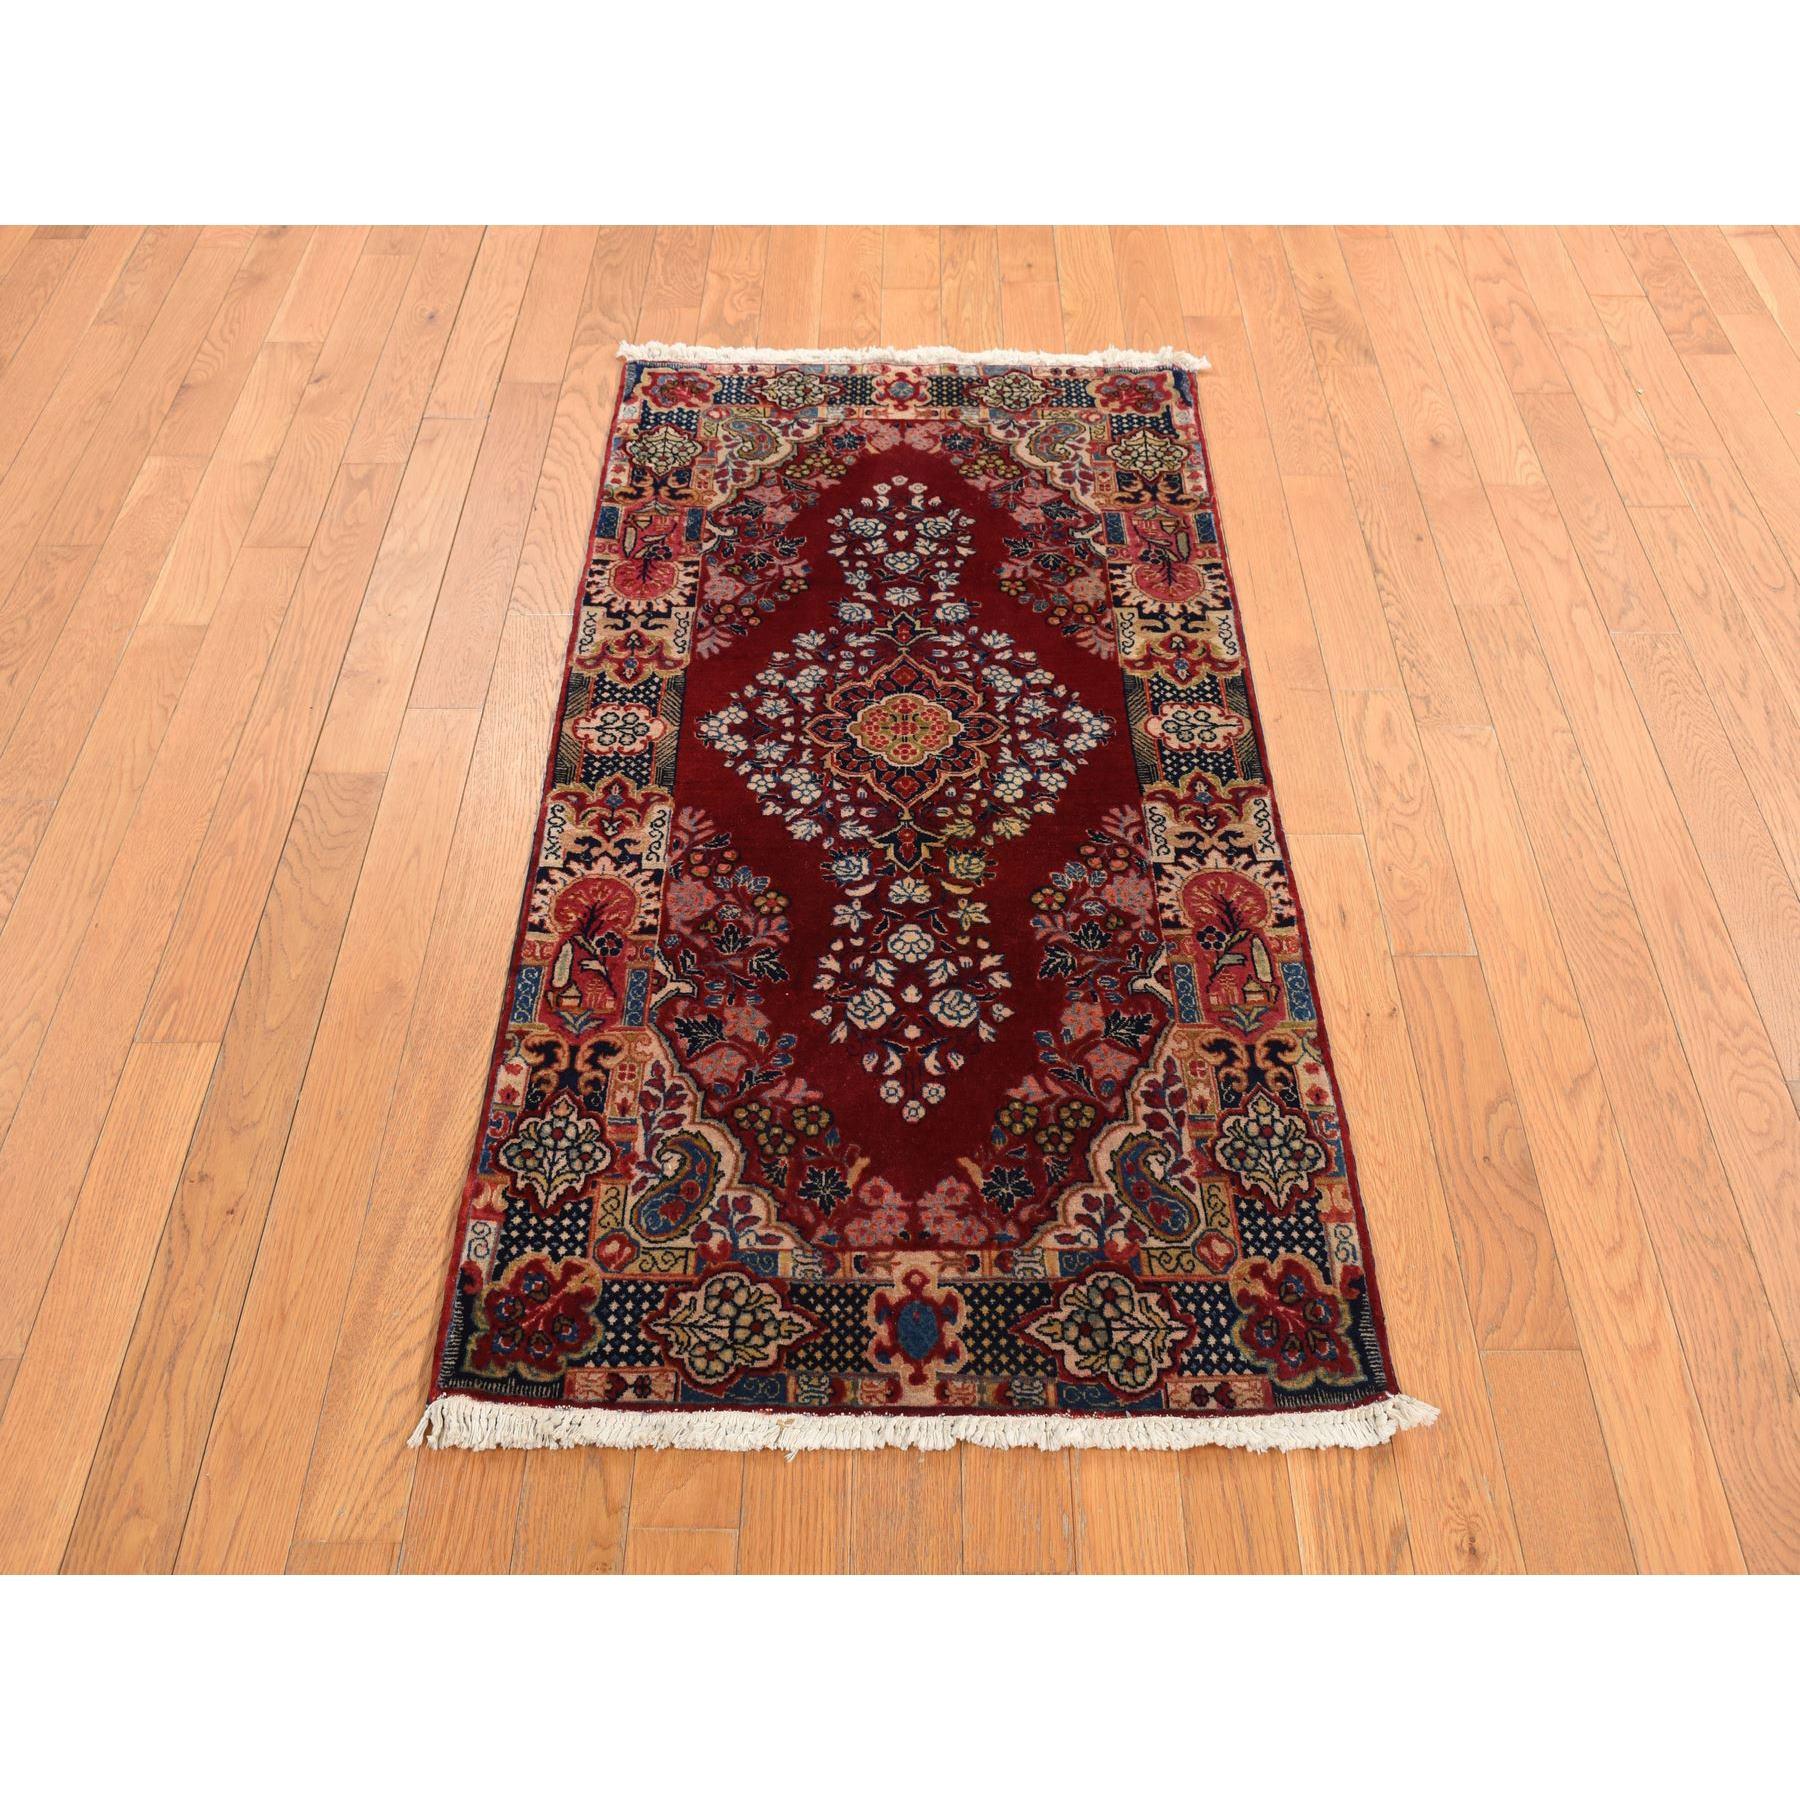 This fabulous Hand-Knotted carpet has been created and designed for extra strength and durability. This rug has been handcrafted for weeks in the traditional method that is used to make
Exact Rug Size in Feet and Inches : 2'6